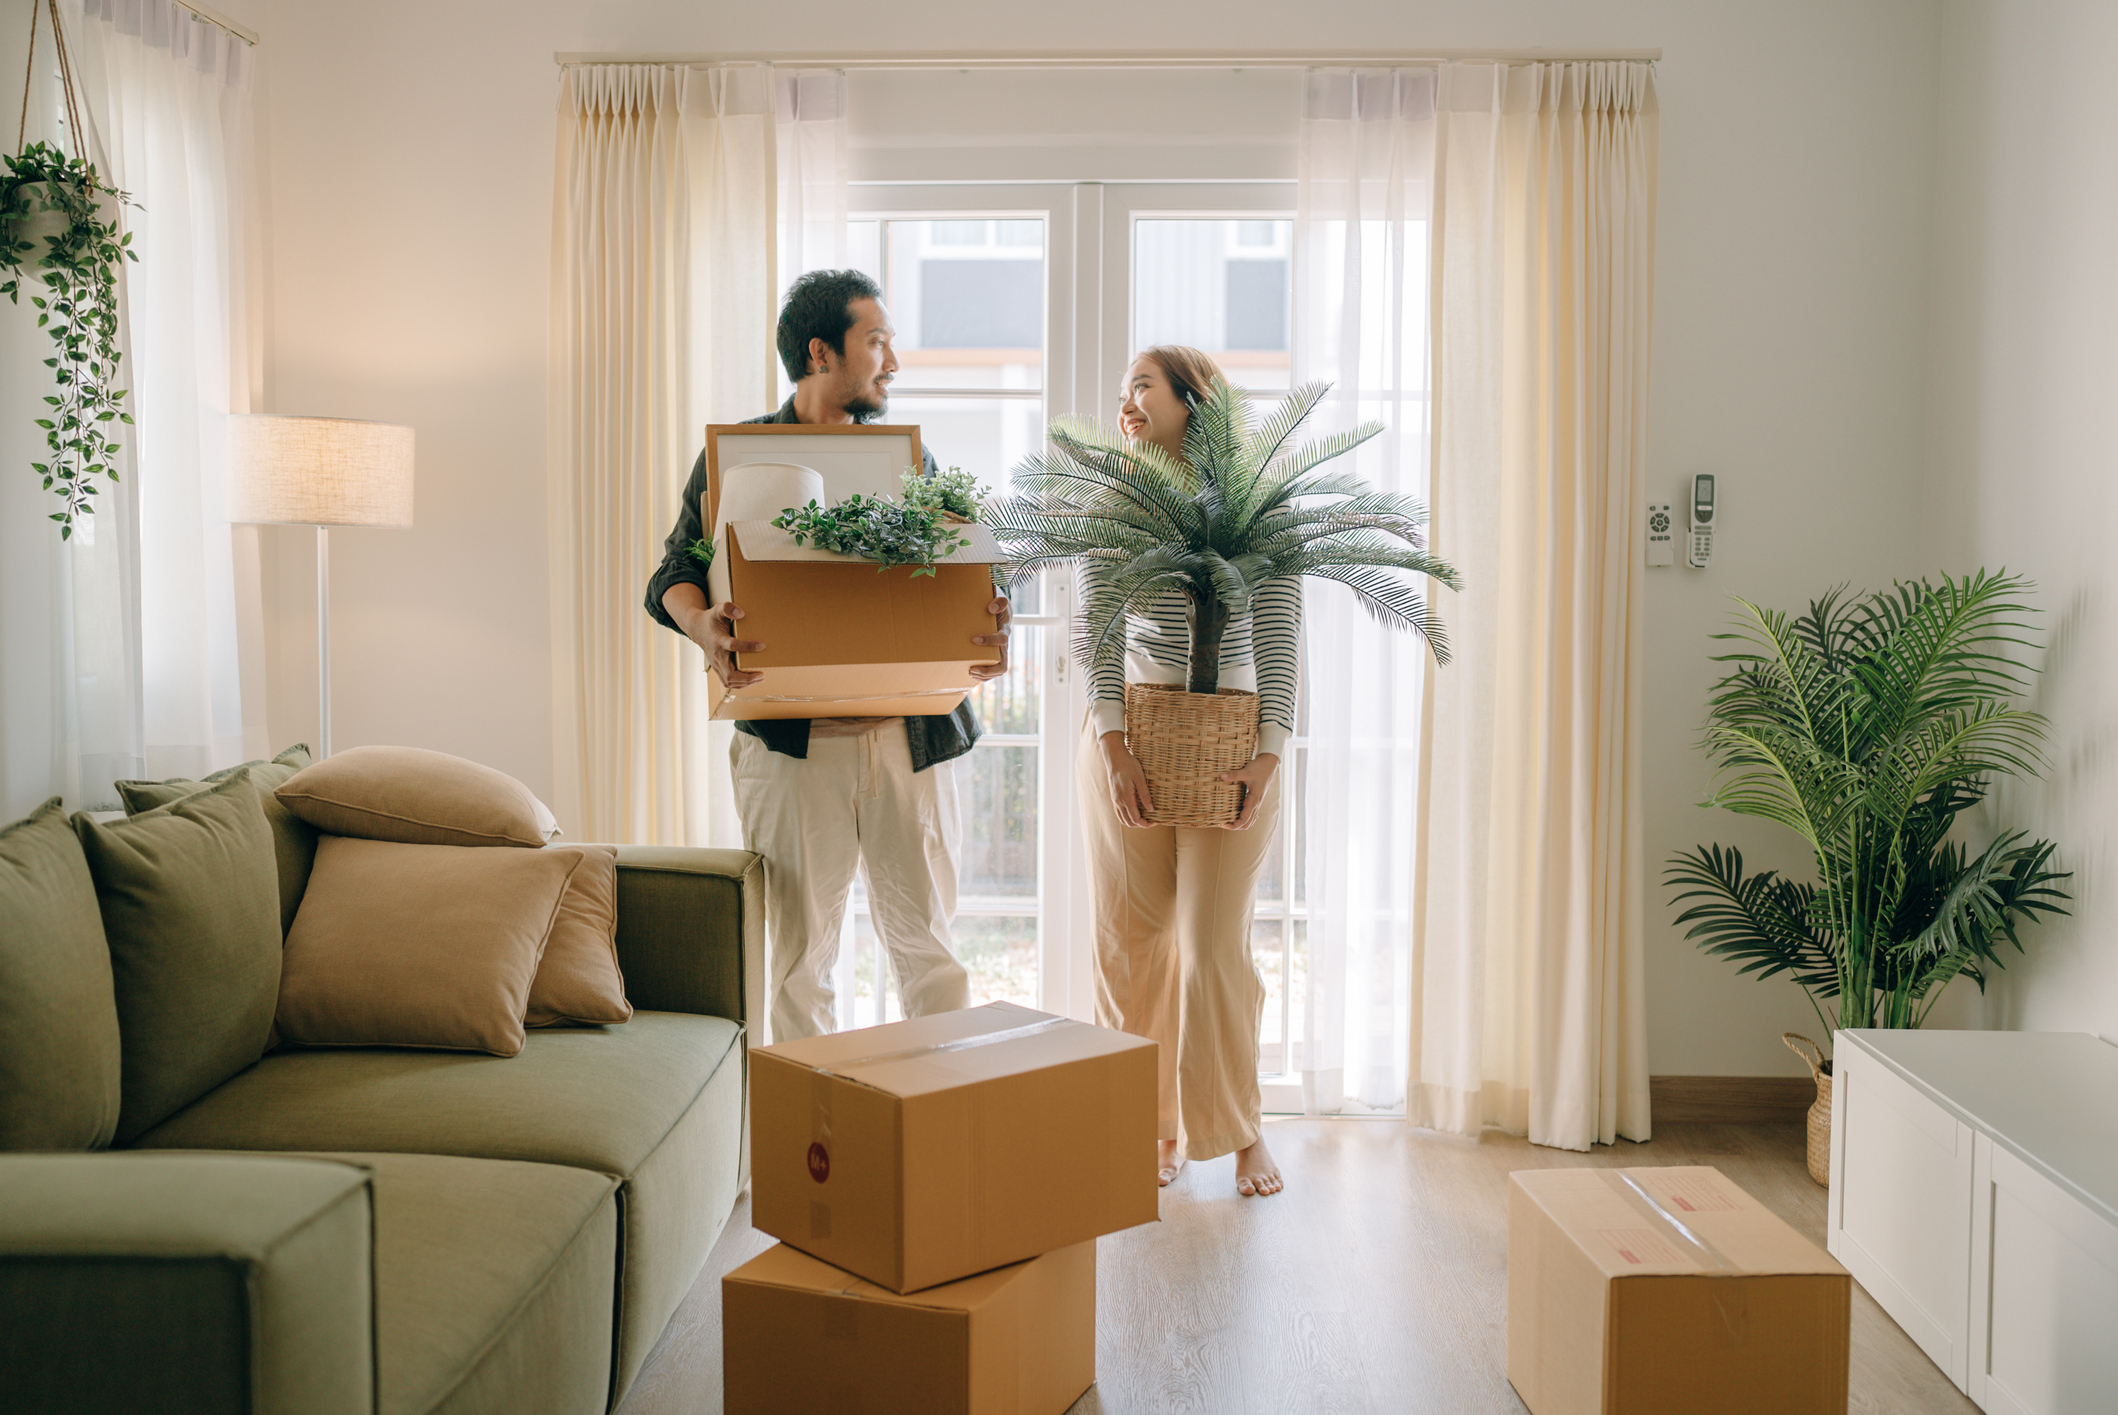 7 Ways to Make Your Move More Eco-Friendly - CNET